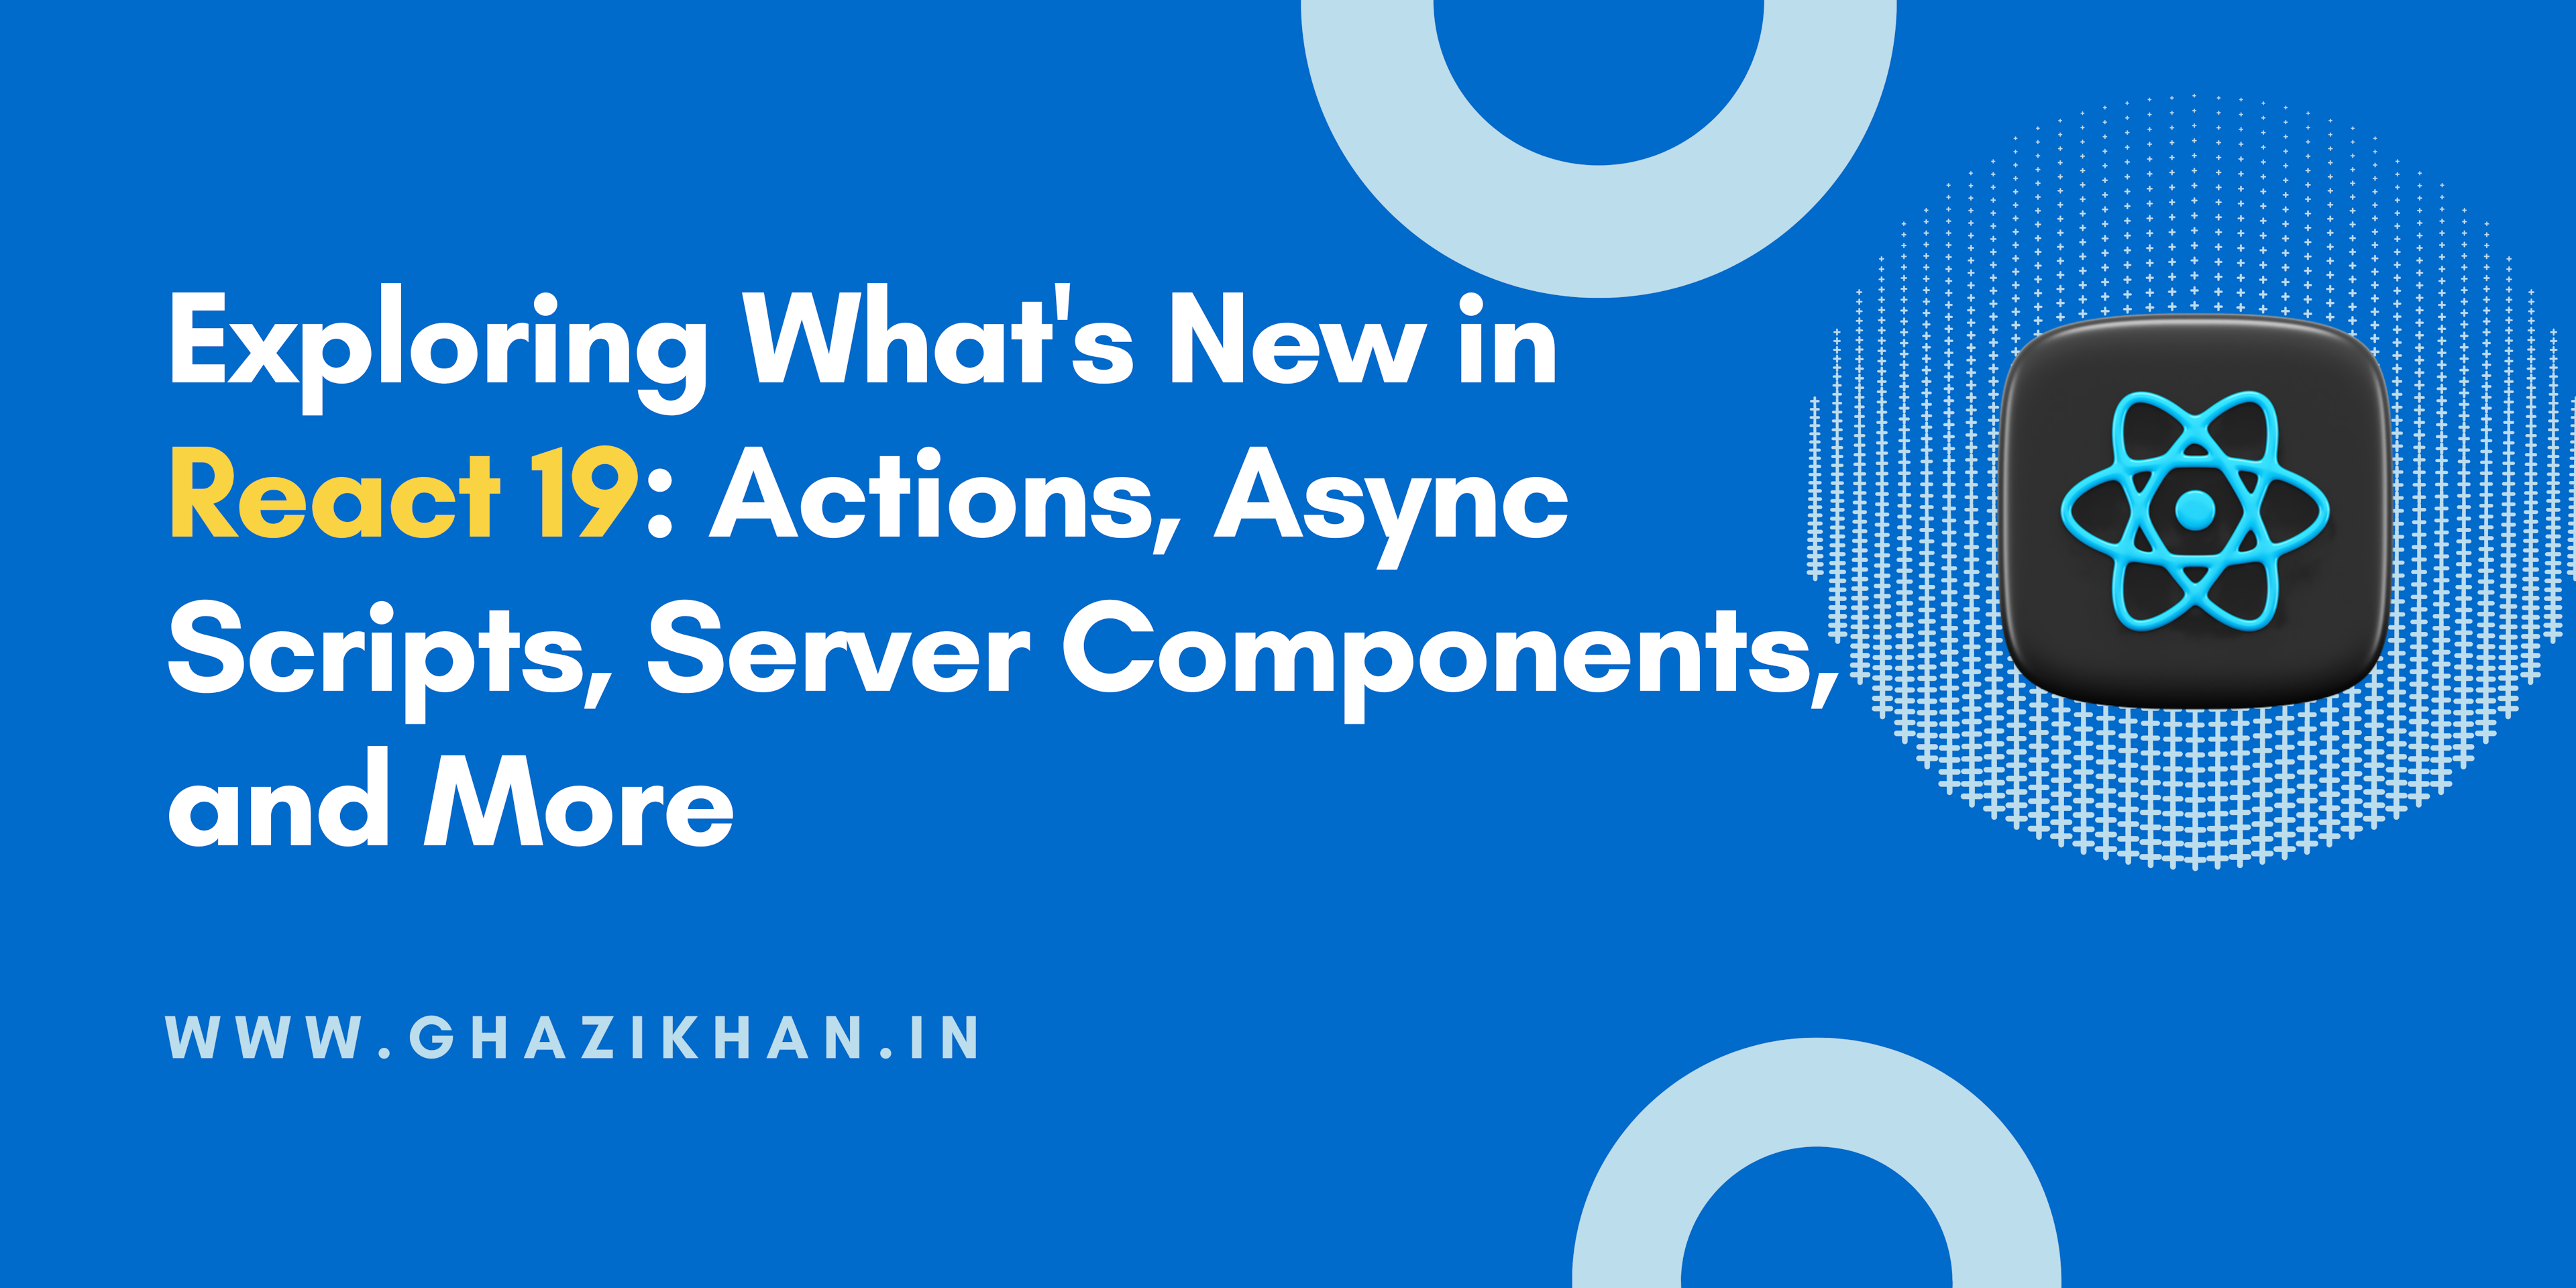 Exploring What's New in React 19: Actions, Async Scripts, Server Components, and More